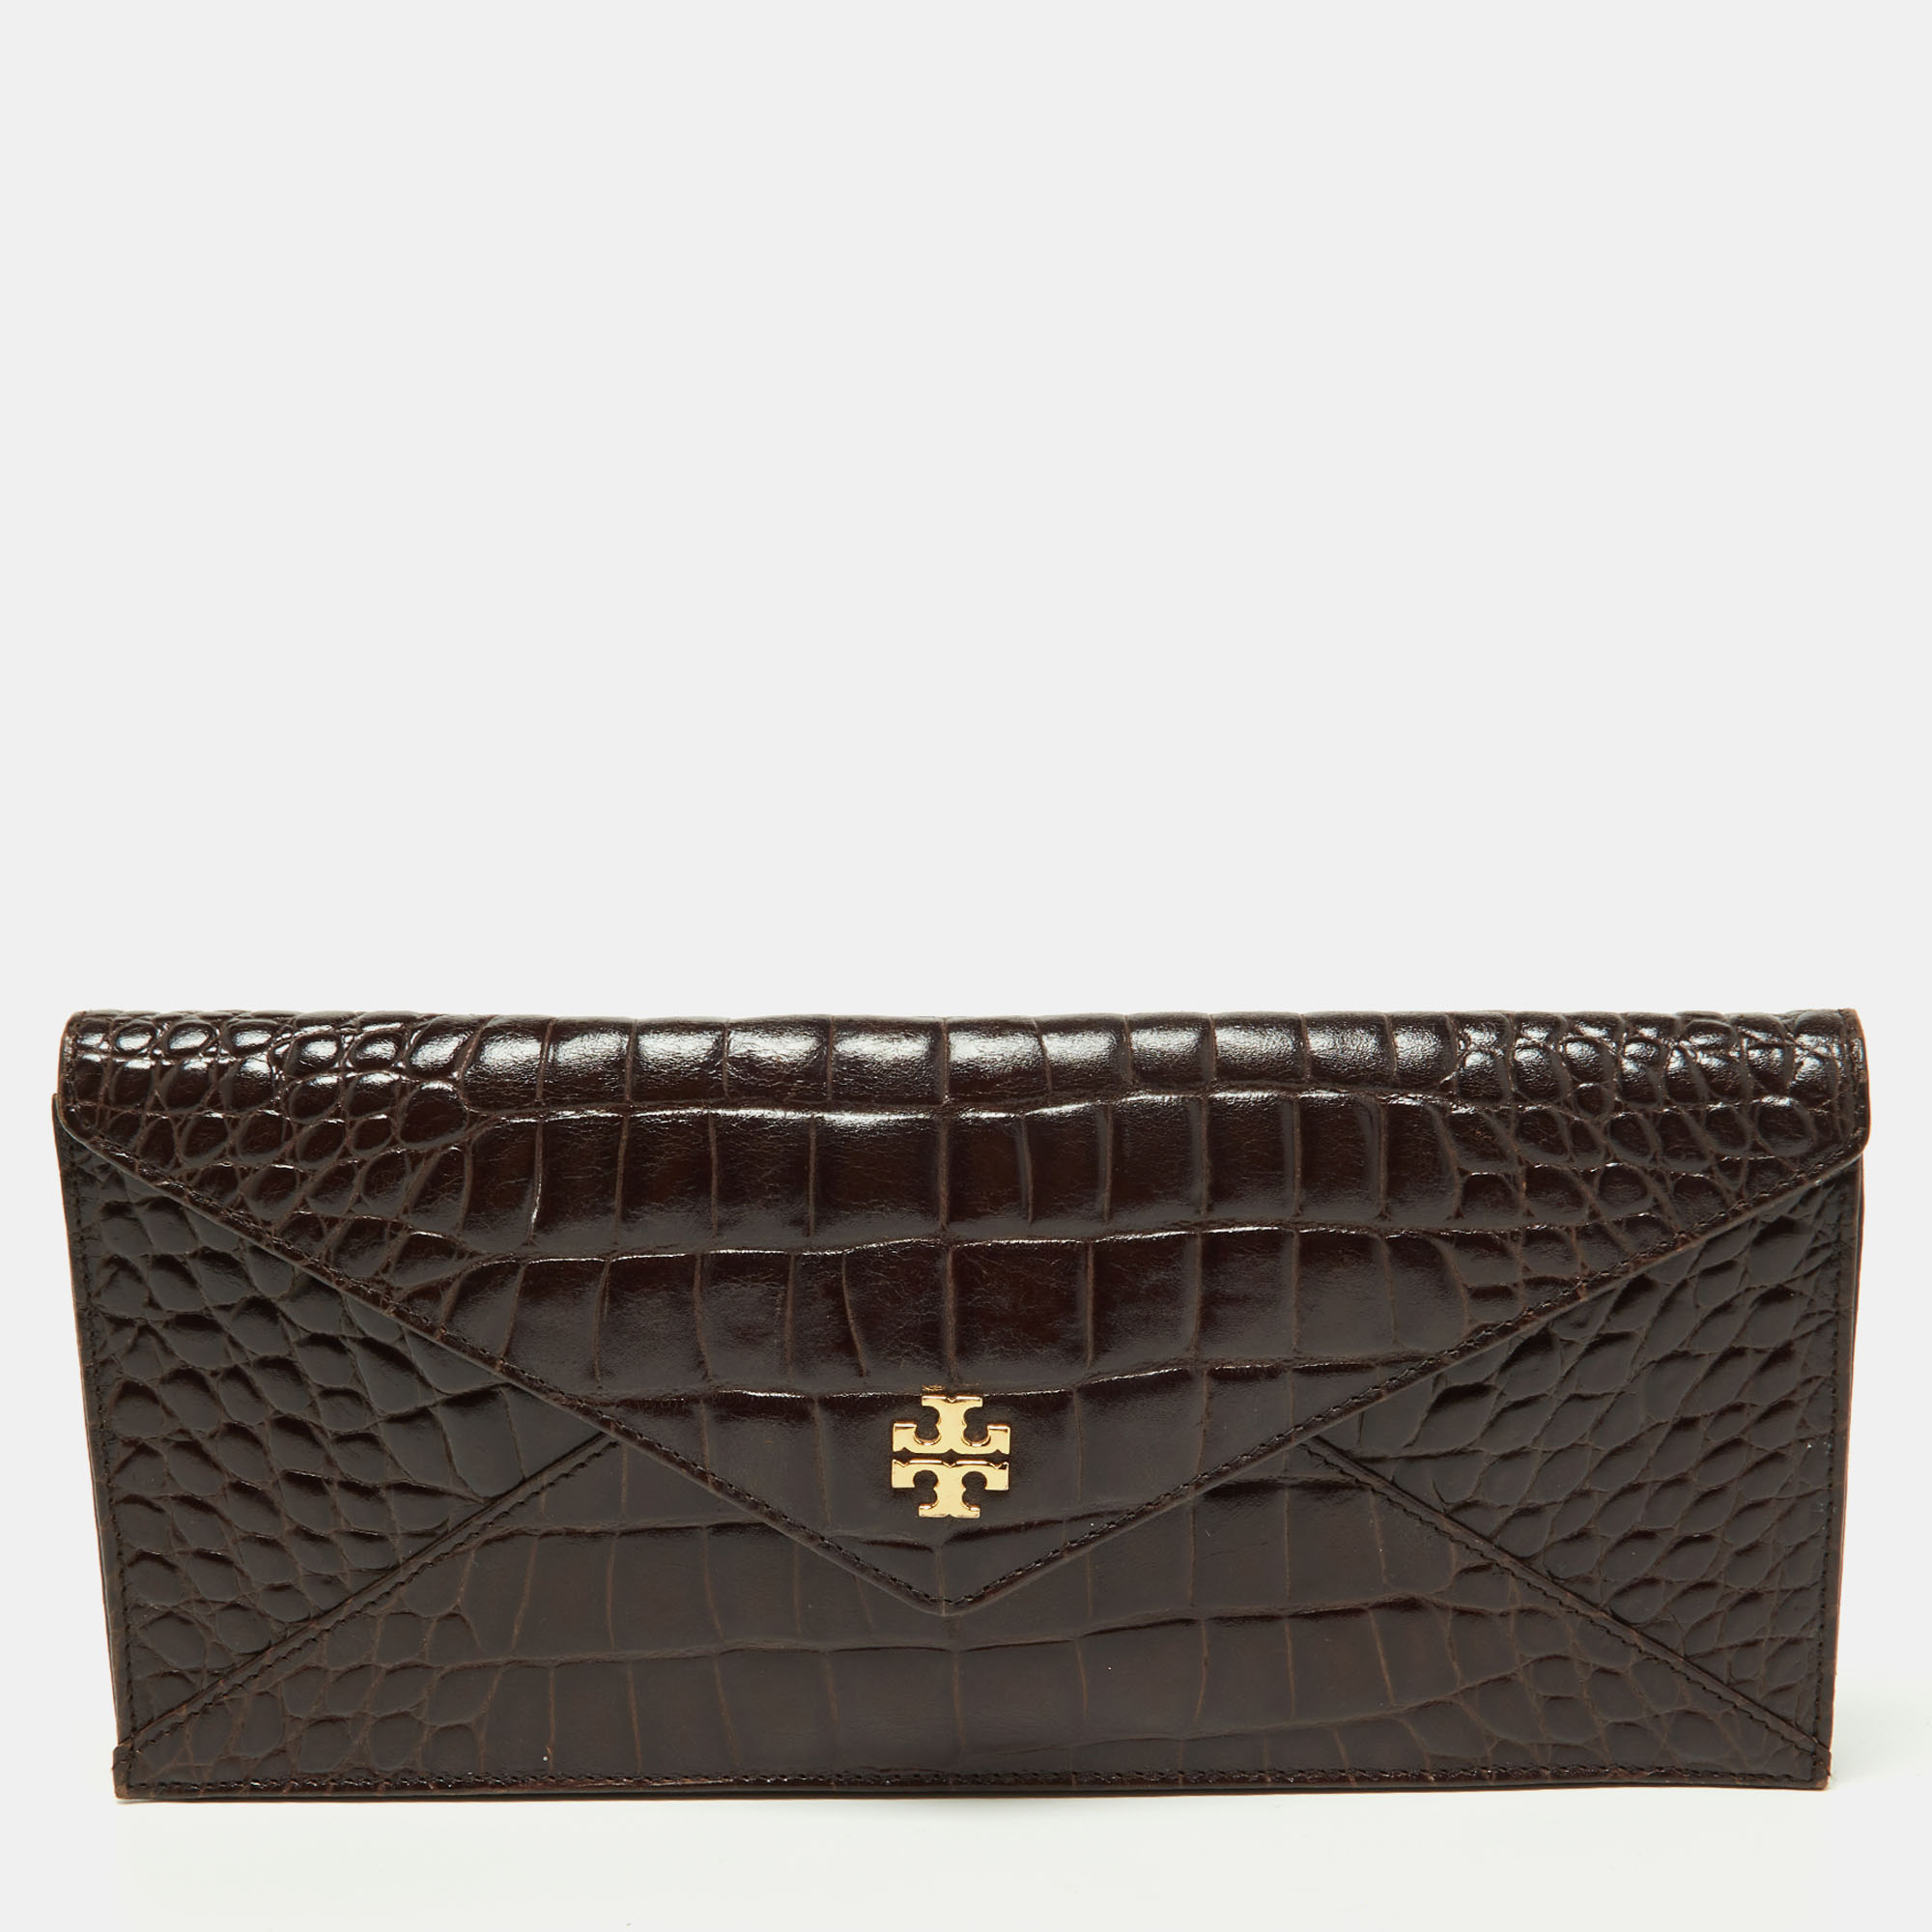 Pre-Owned & Vintage TORY BURCH Bags for Women